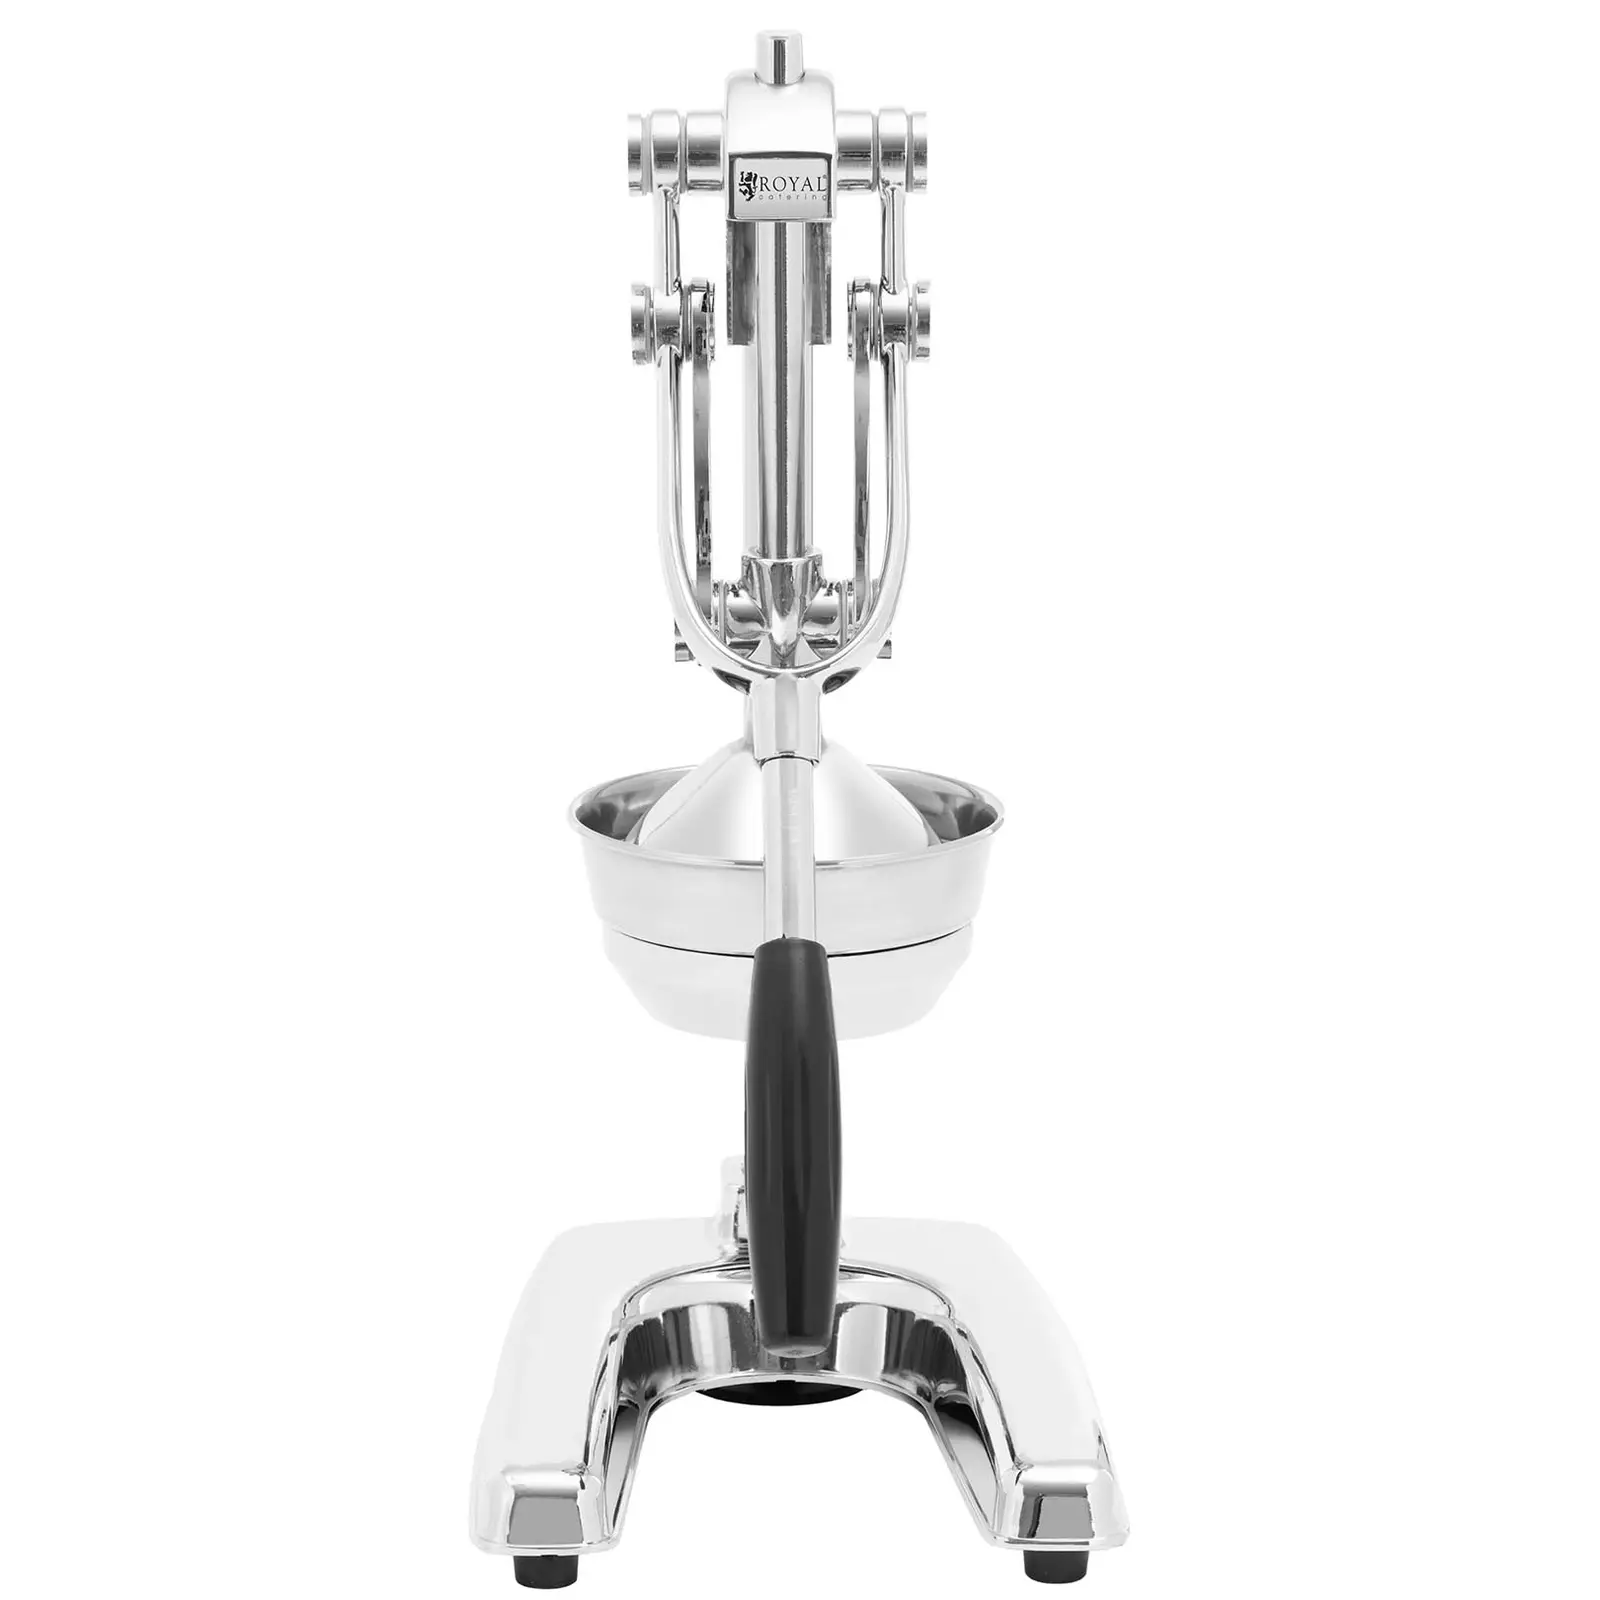 Manual Juicer - Stainless steel - 1-hand operation - Royal Catering